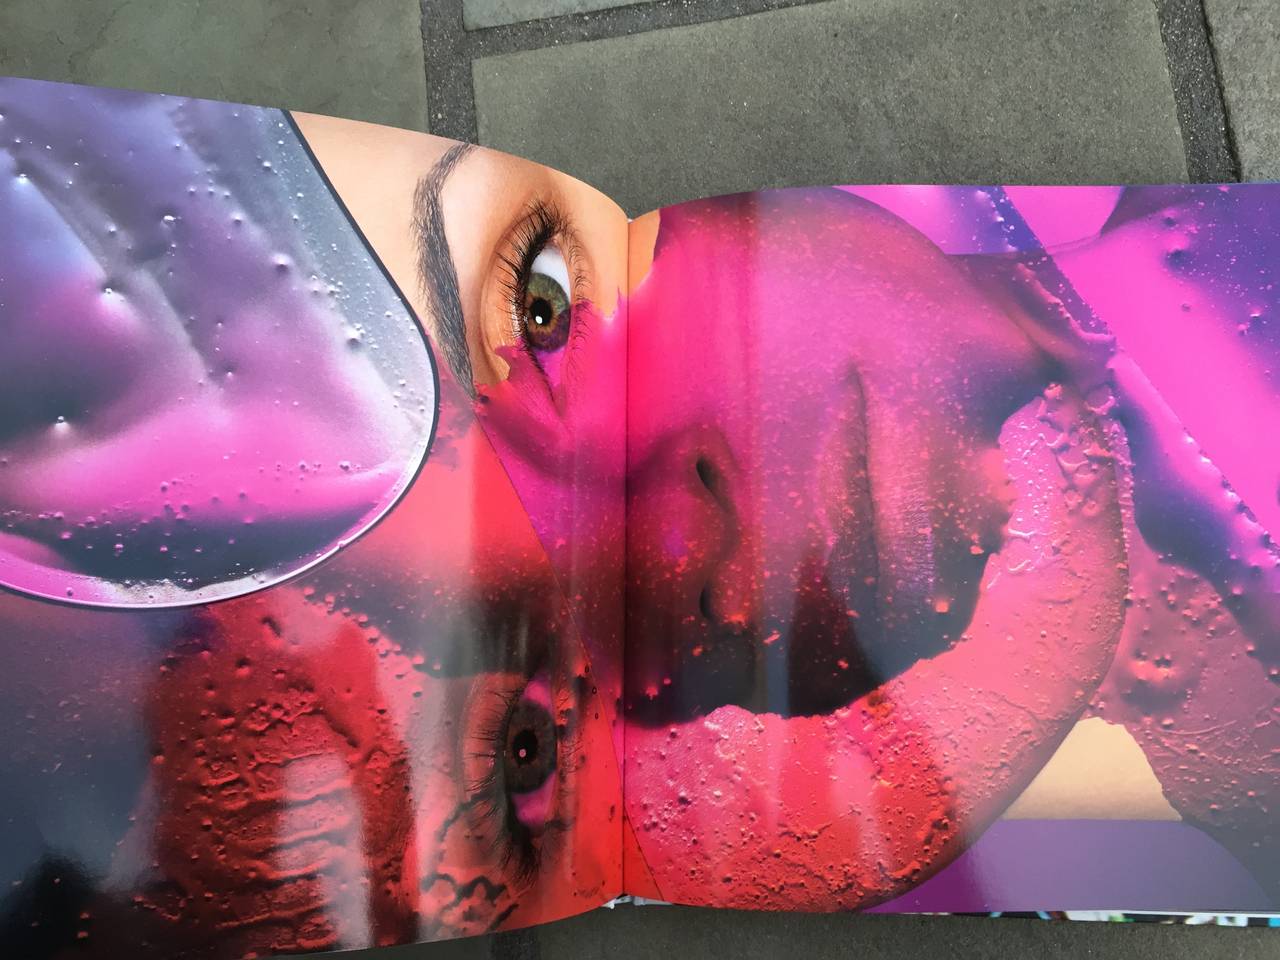 #36  Power, Visionaire has teamed up with the renowned cosmetic house Shiseido to create a hardcover book housed in an iridescent injection-molded case. Nature and beauty are the starting points for Power/, an issue combining saturated colors,